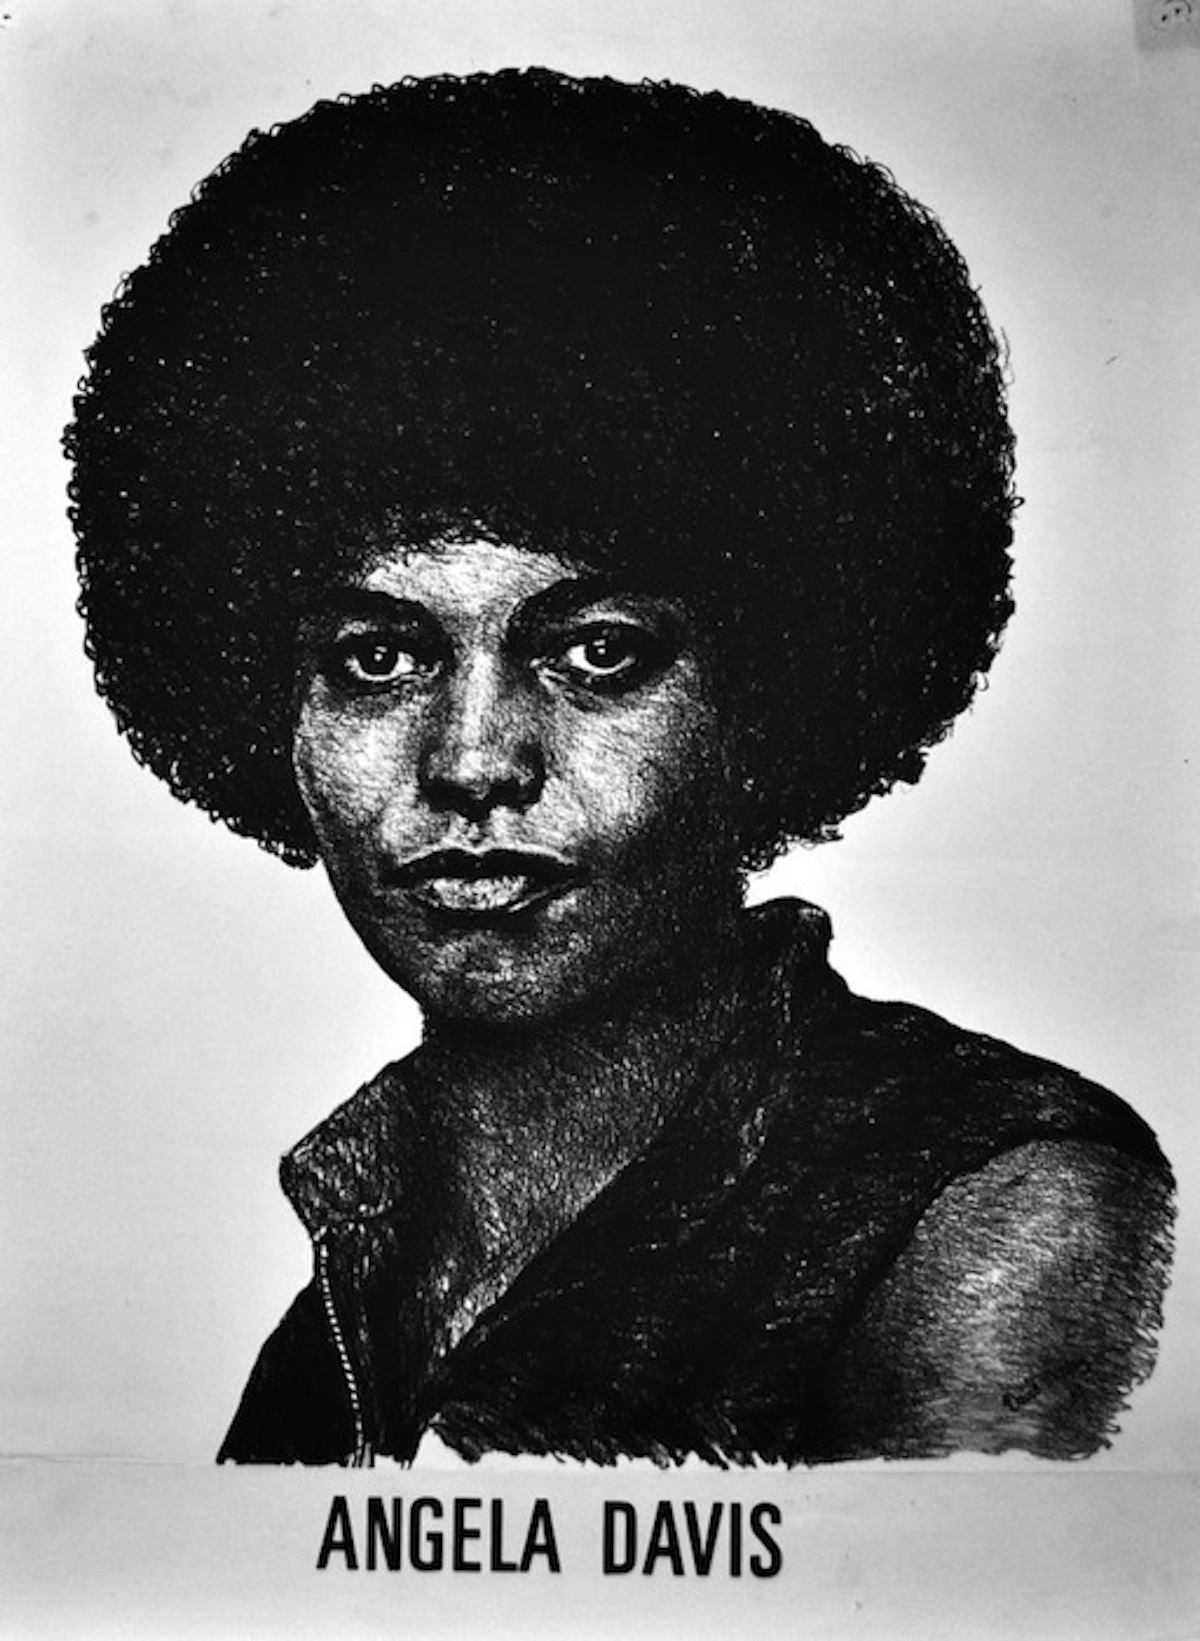 Images of Angela created for the black community by artists such David Mosley portrayed Davis as a “strong black sister.”